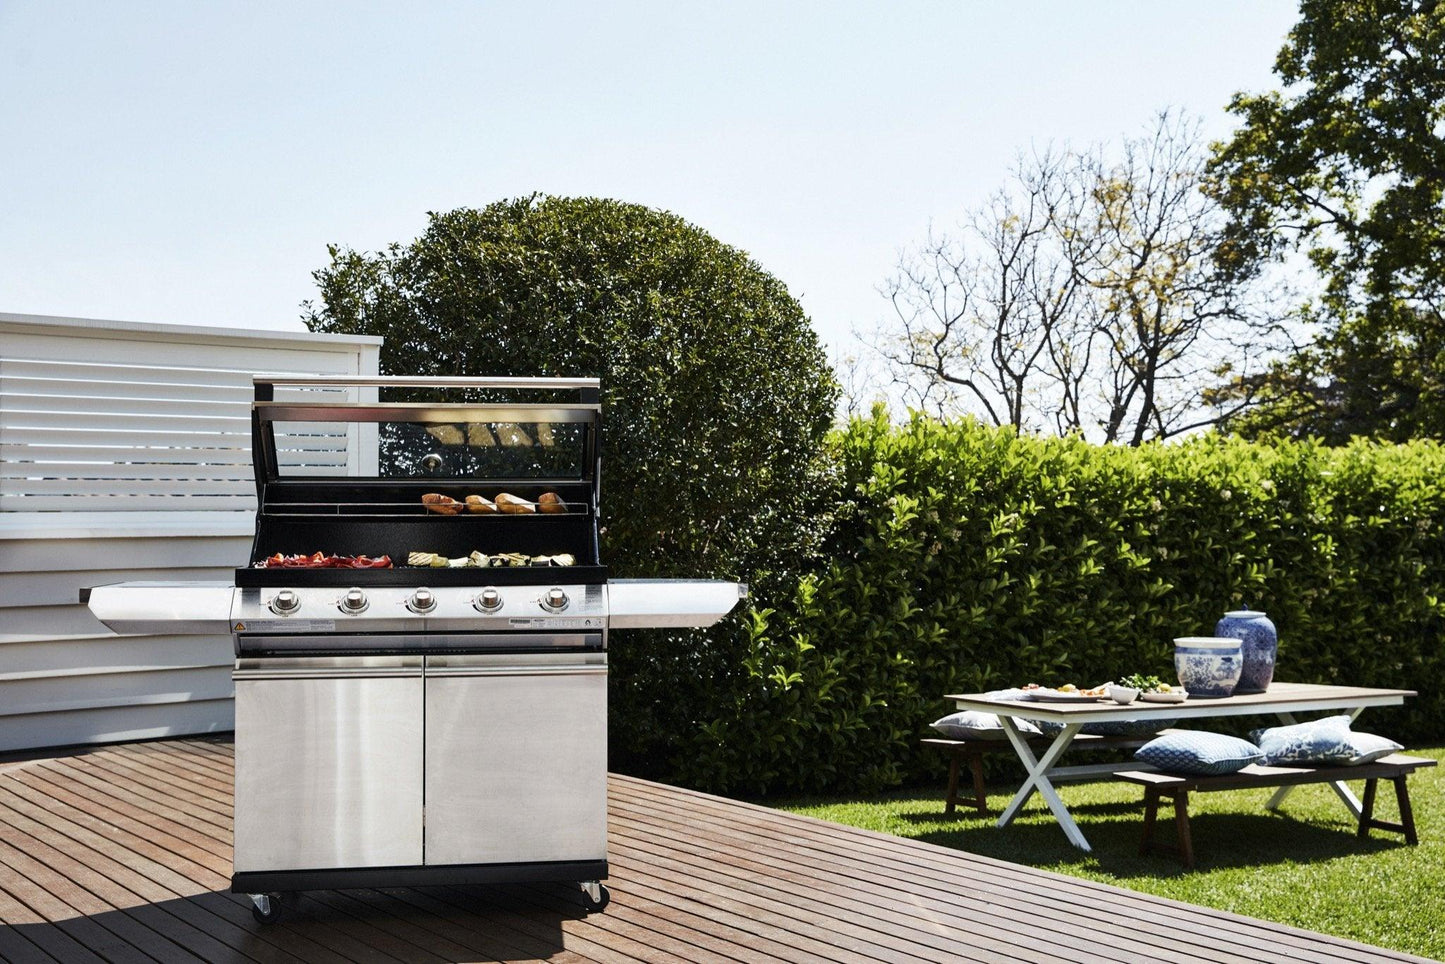 A sleek Brisks BeefEater 1200S Series 5 Burner BBQ & Trolley is positioned on a wooden deck, with various foods cooking on the stainless steel outdoor gas grill. In the background, there's a white wall and lush green hedges. Nearby, a white picnic table holds plates and vases, with cushioned seats on the grass, enhancing your outdoor living experience.